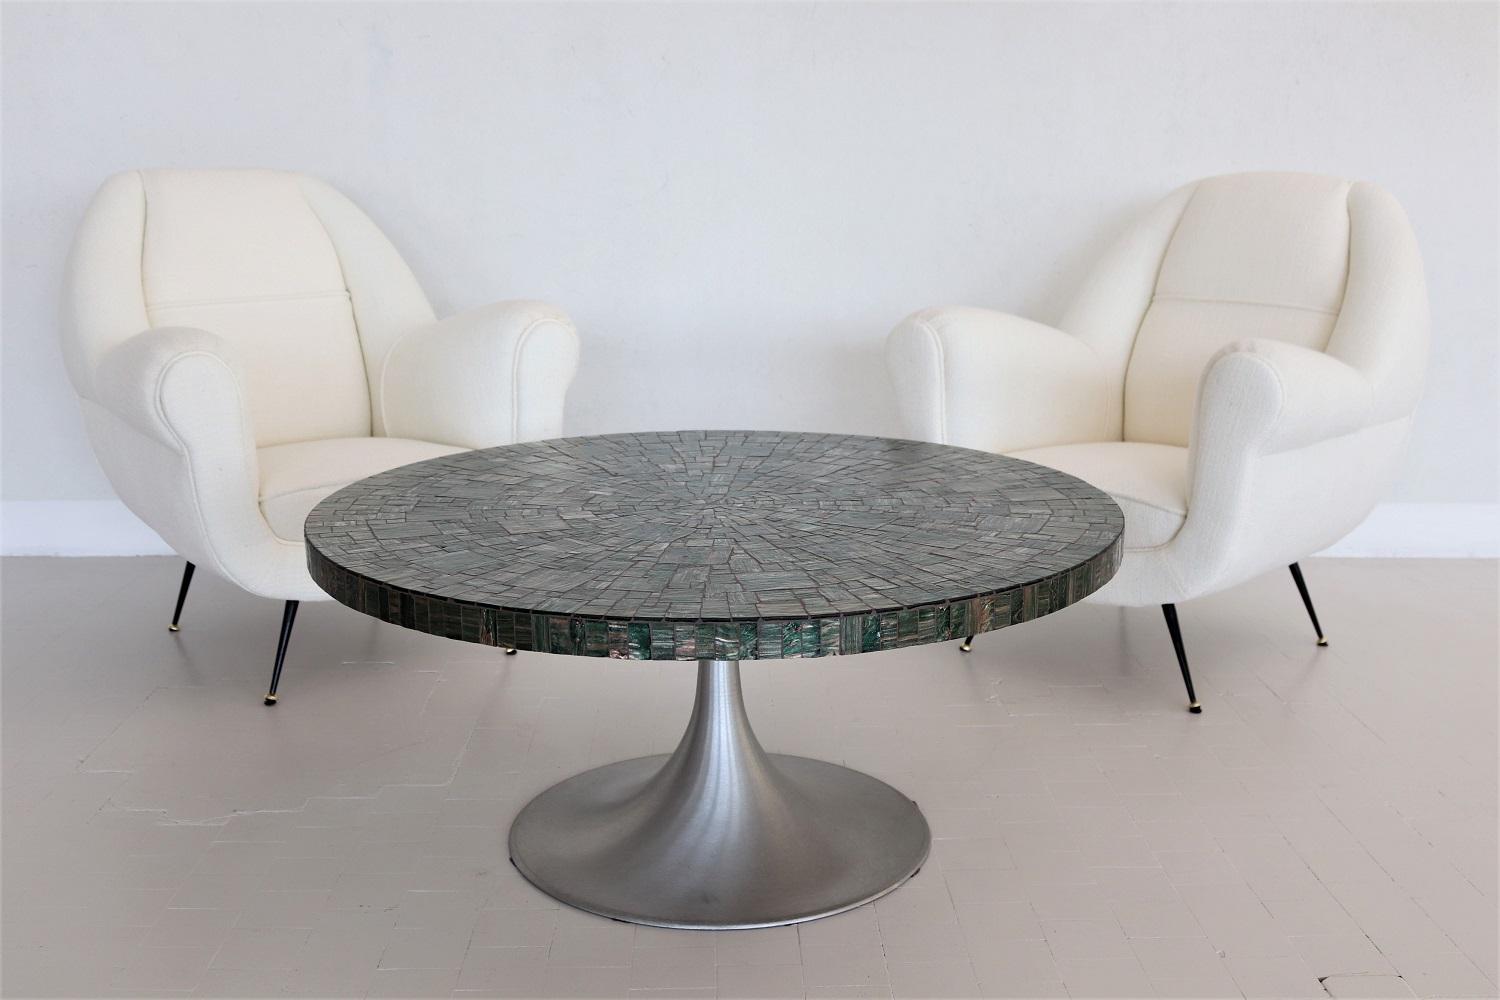 Gorgeous and very rare coffee table with beautiful green glass mosaic in mother of pearl optic and aluminum pedestal.
The manufacturing is from the late 1960s in Germany, made by artist Heinz Lilienthal (1927-2006).
The table is a stunning piece